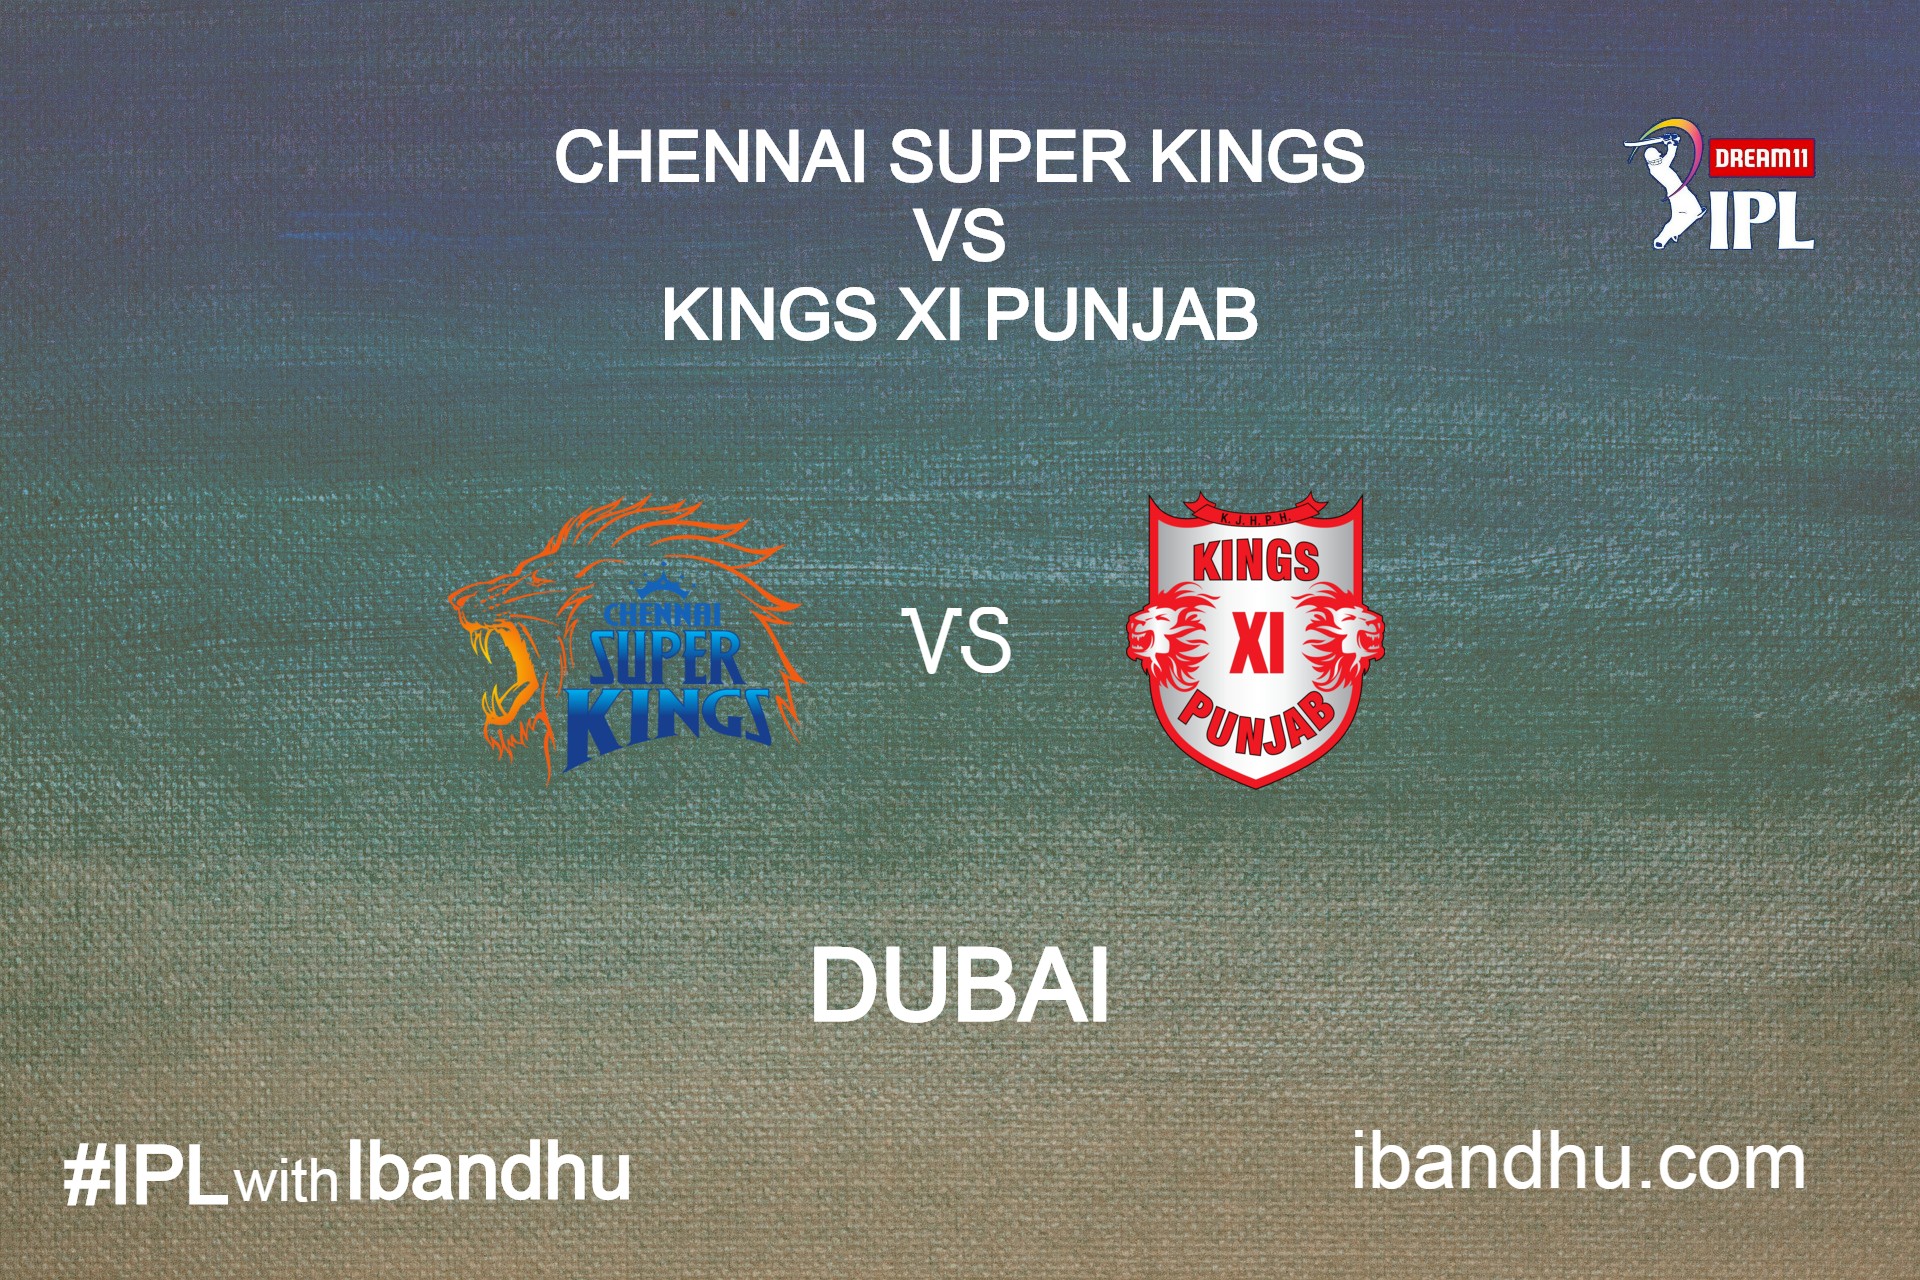 18th Match of IPL 2020 Between CSK and KXIP